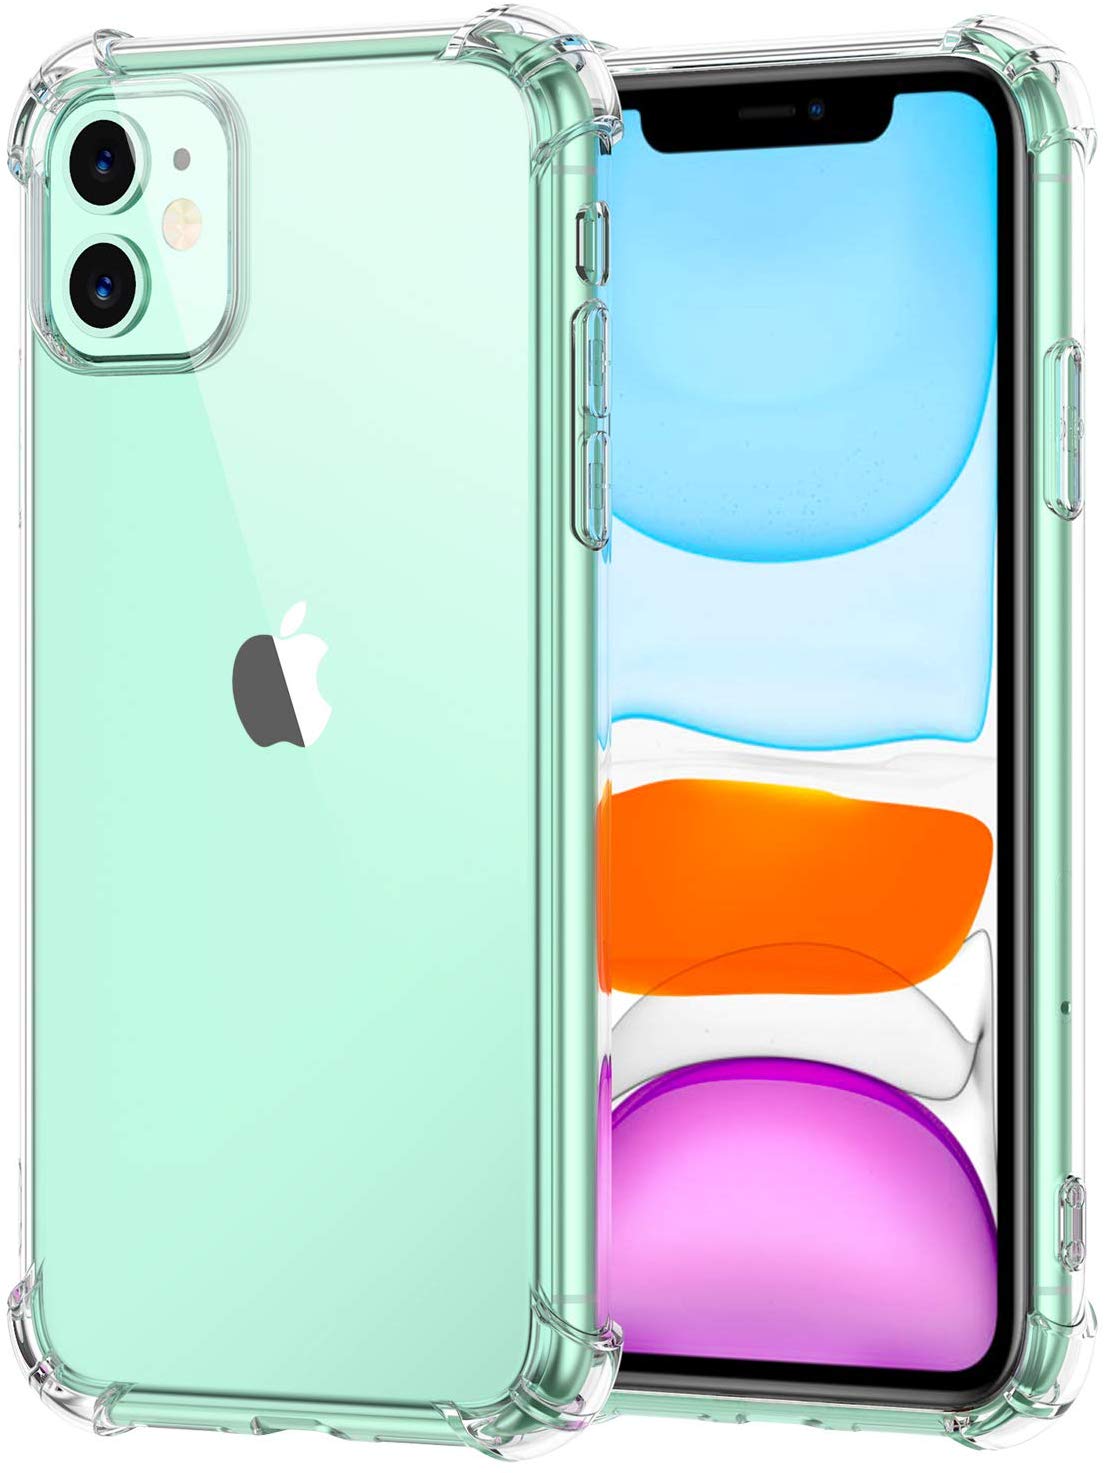 Njjex iPhone 11 / iPhone XR / iPhone 12 Pro Max Case, Njjex iPhone XR Crystal Clear Shock Absorption Technology Bumper Soft TPU Cover Case For Apple iPhone 11, 12 Mini, 12 Pro Max - image 1 of 6